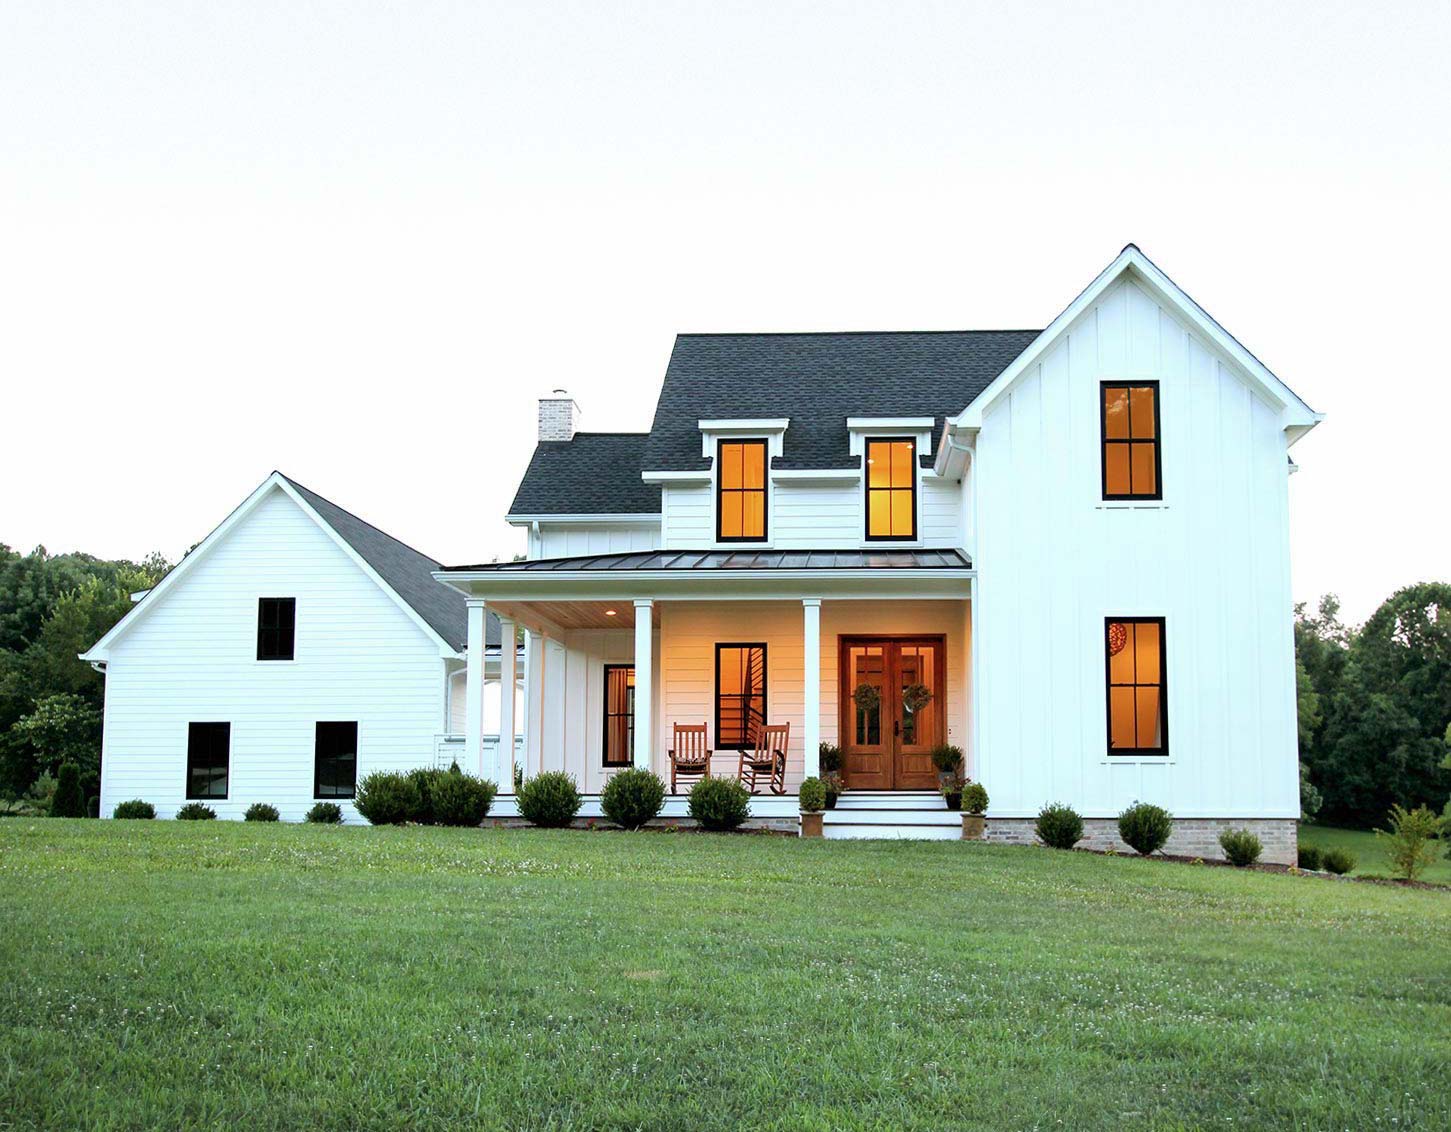 9 Stunning Before And After Farmhouse Remodels City Girl Gone Mom